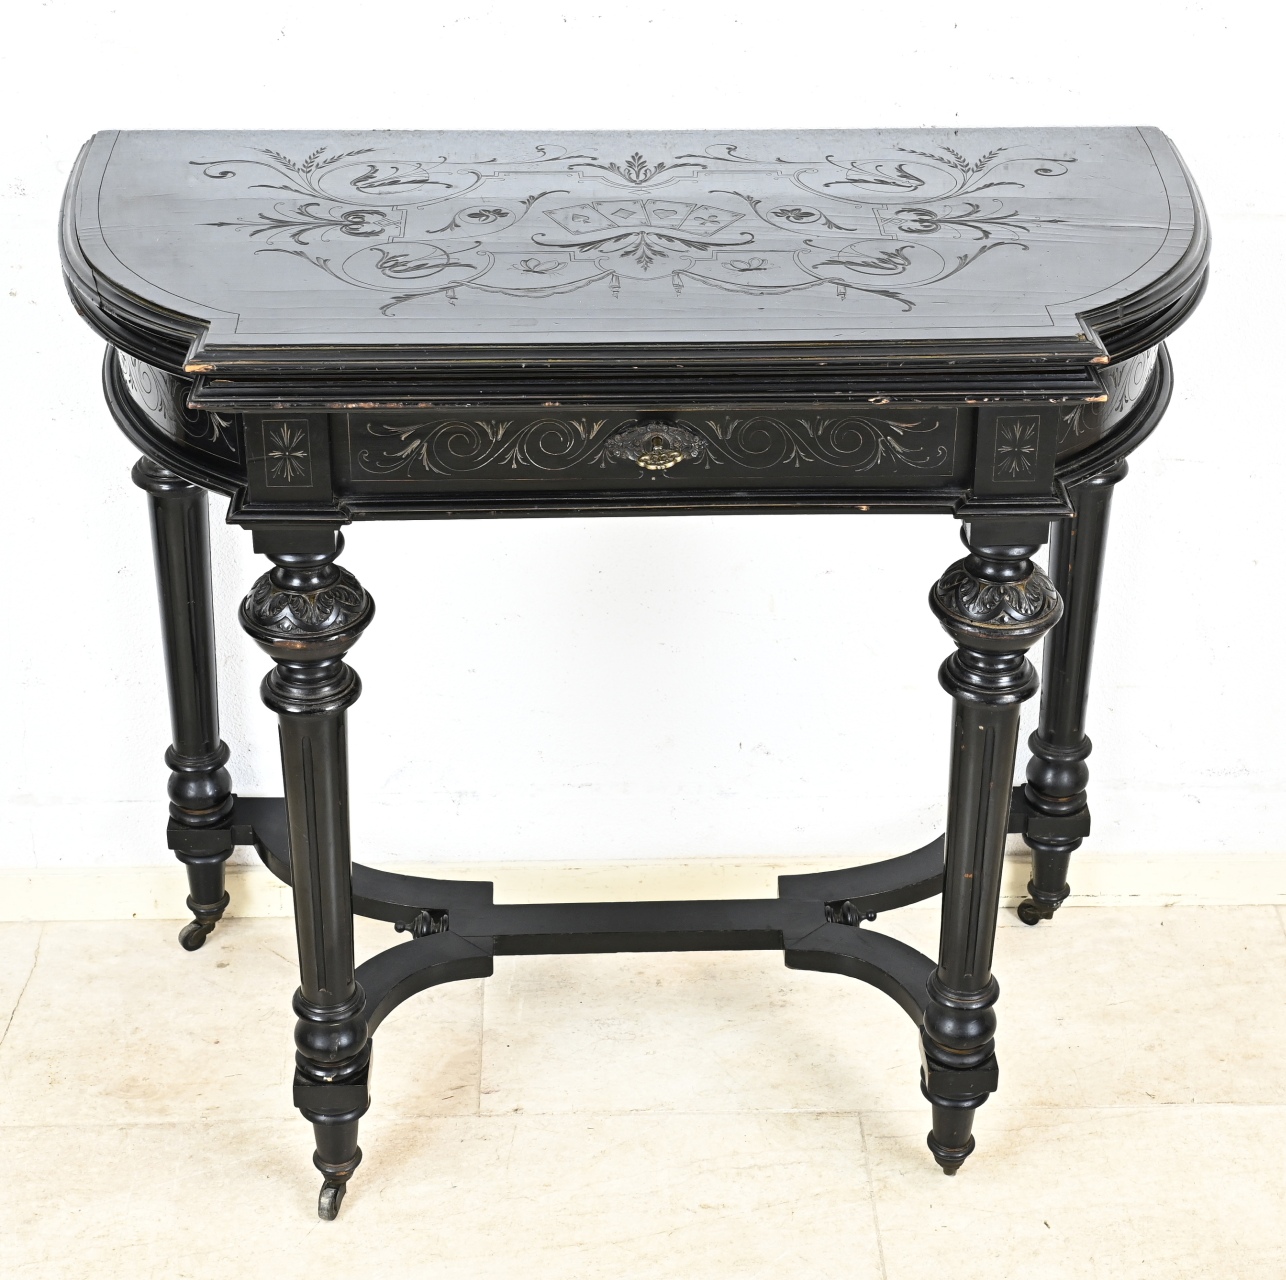 Antique gaming table, 1870